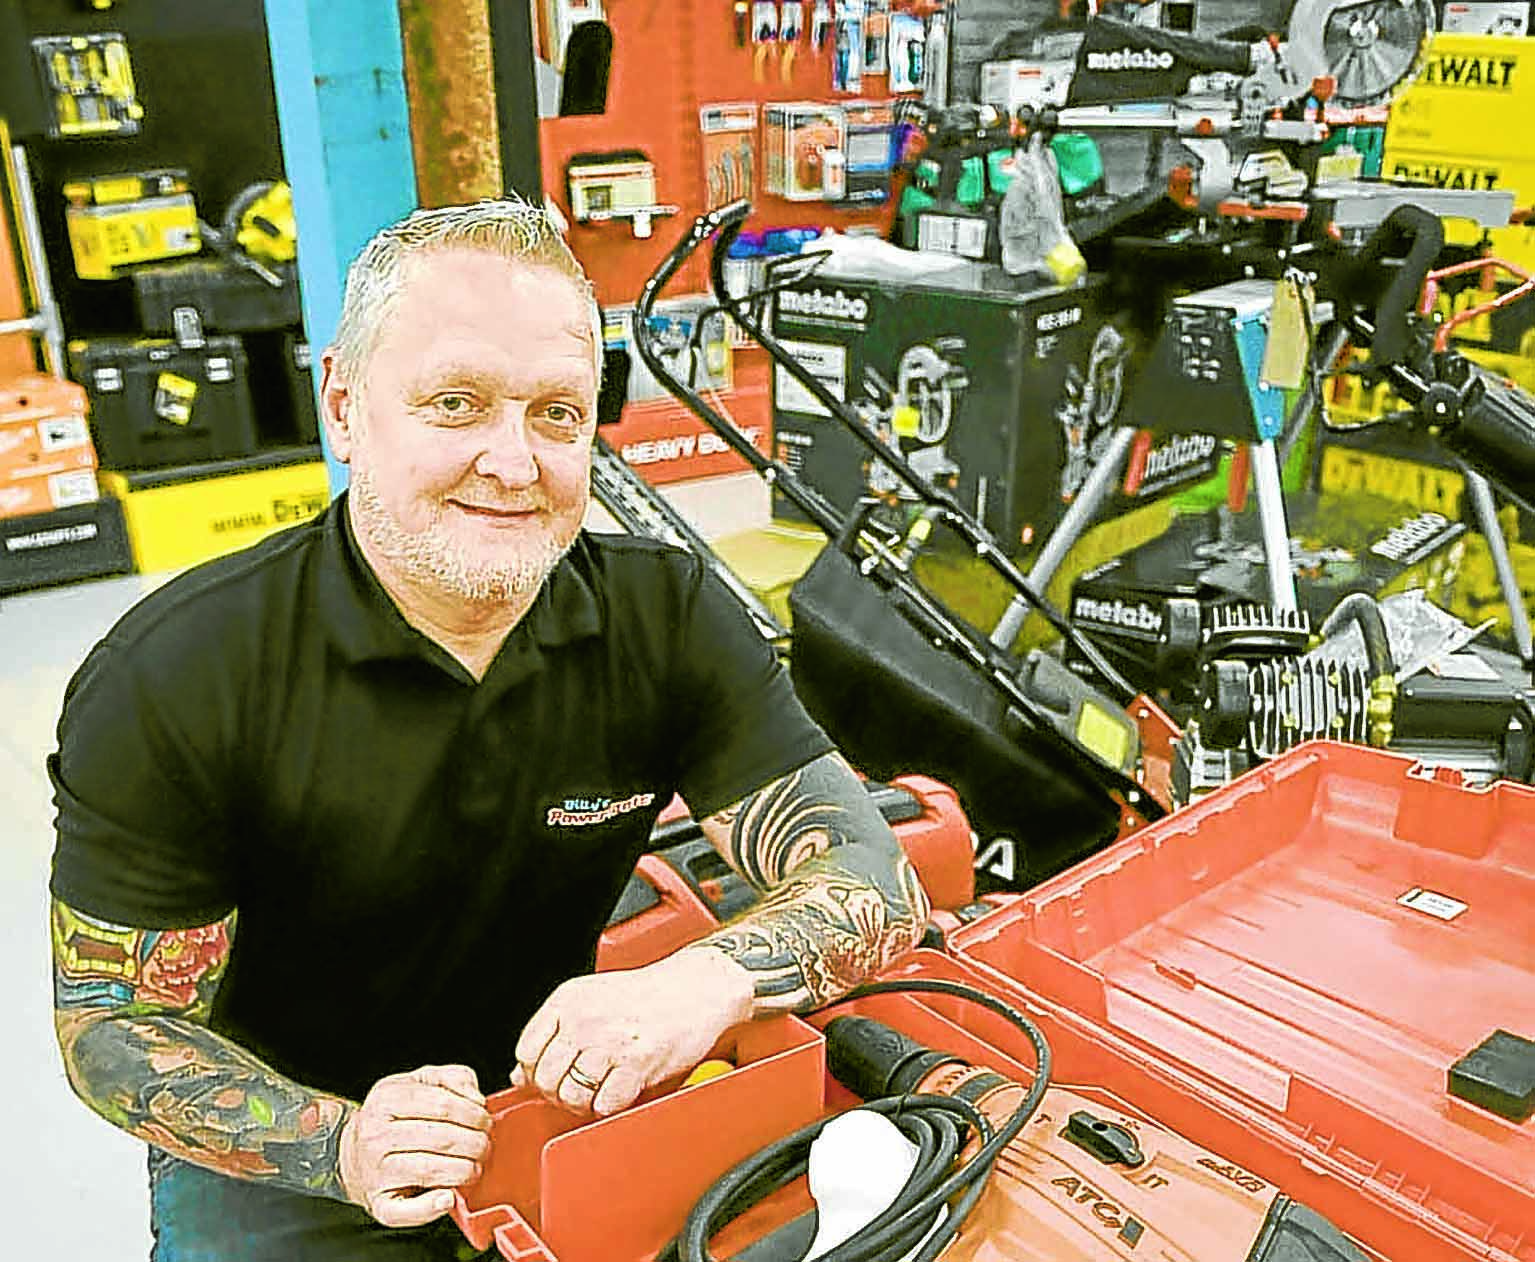 Tool boss in kind gesture after regionwide thefts